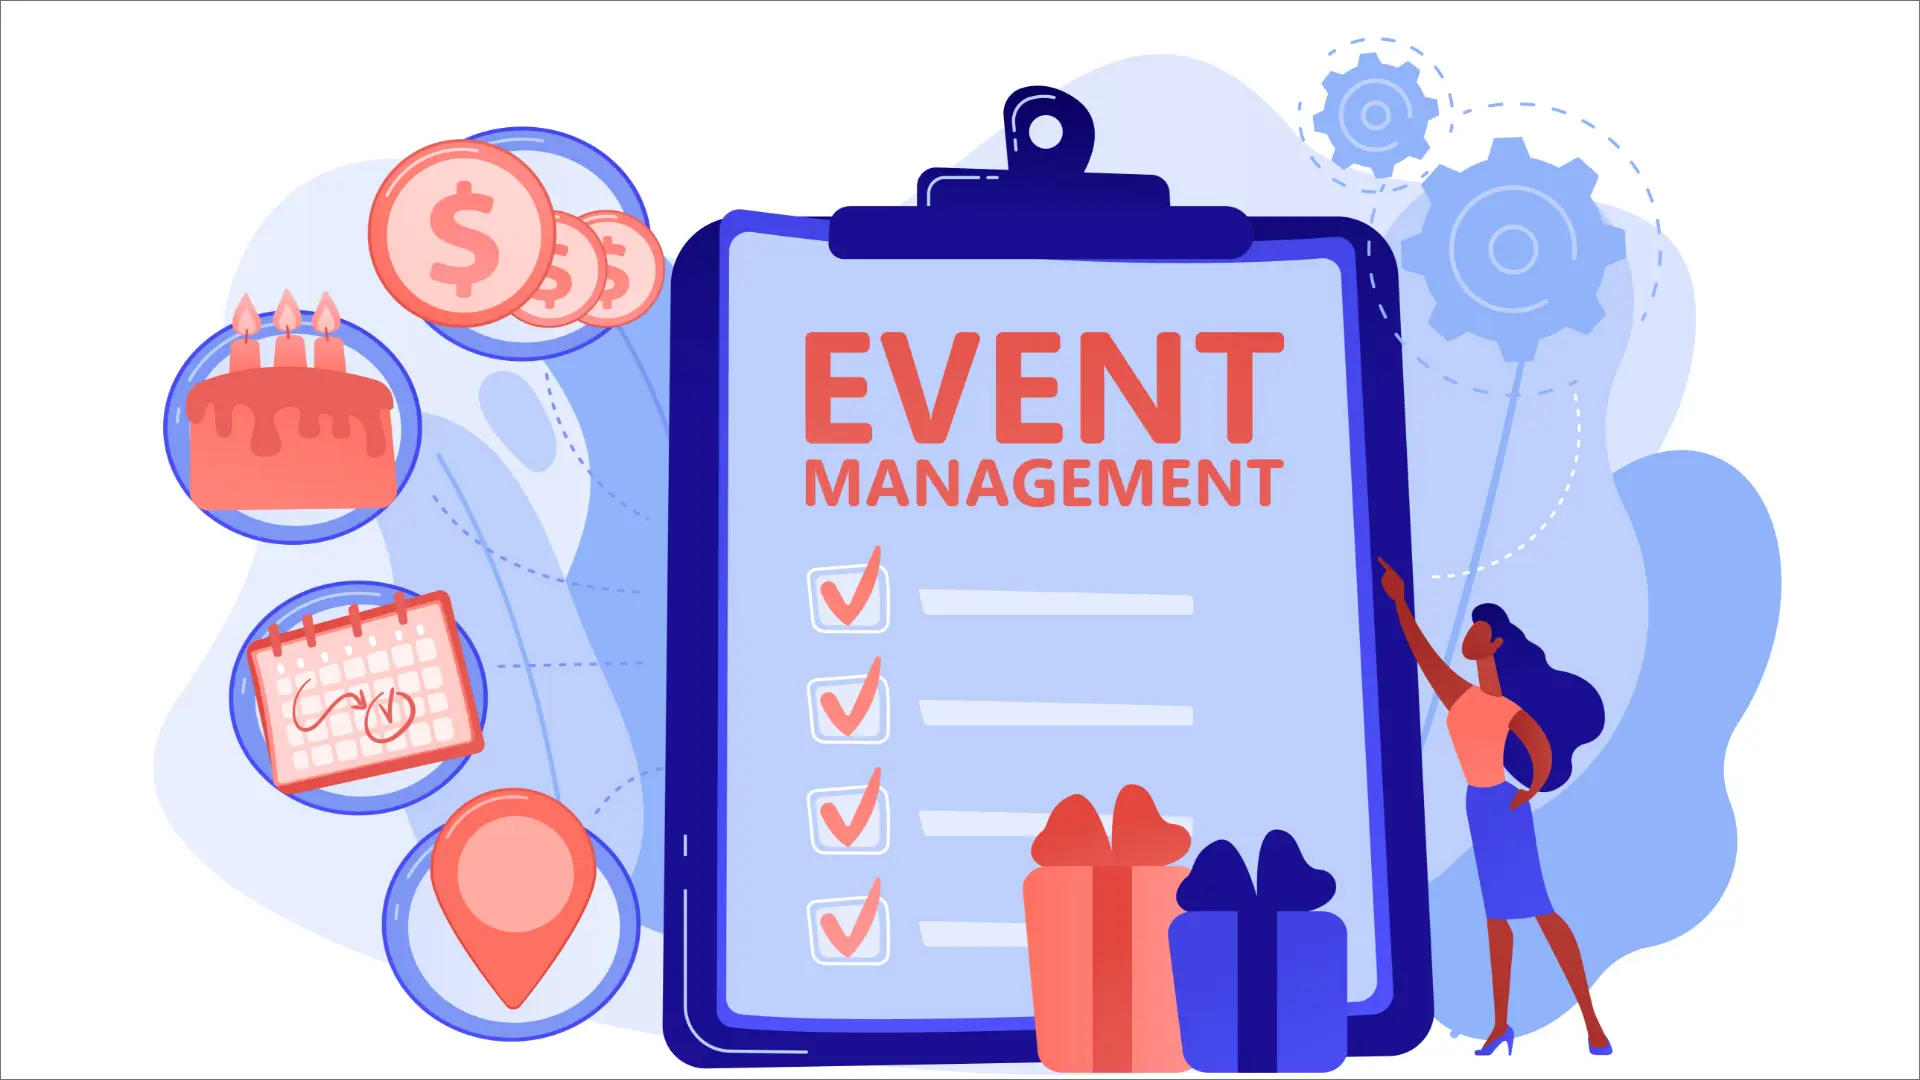 Ultimate Event Planning Checklist